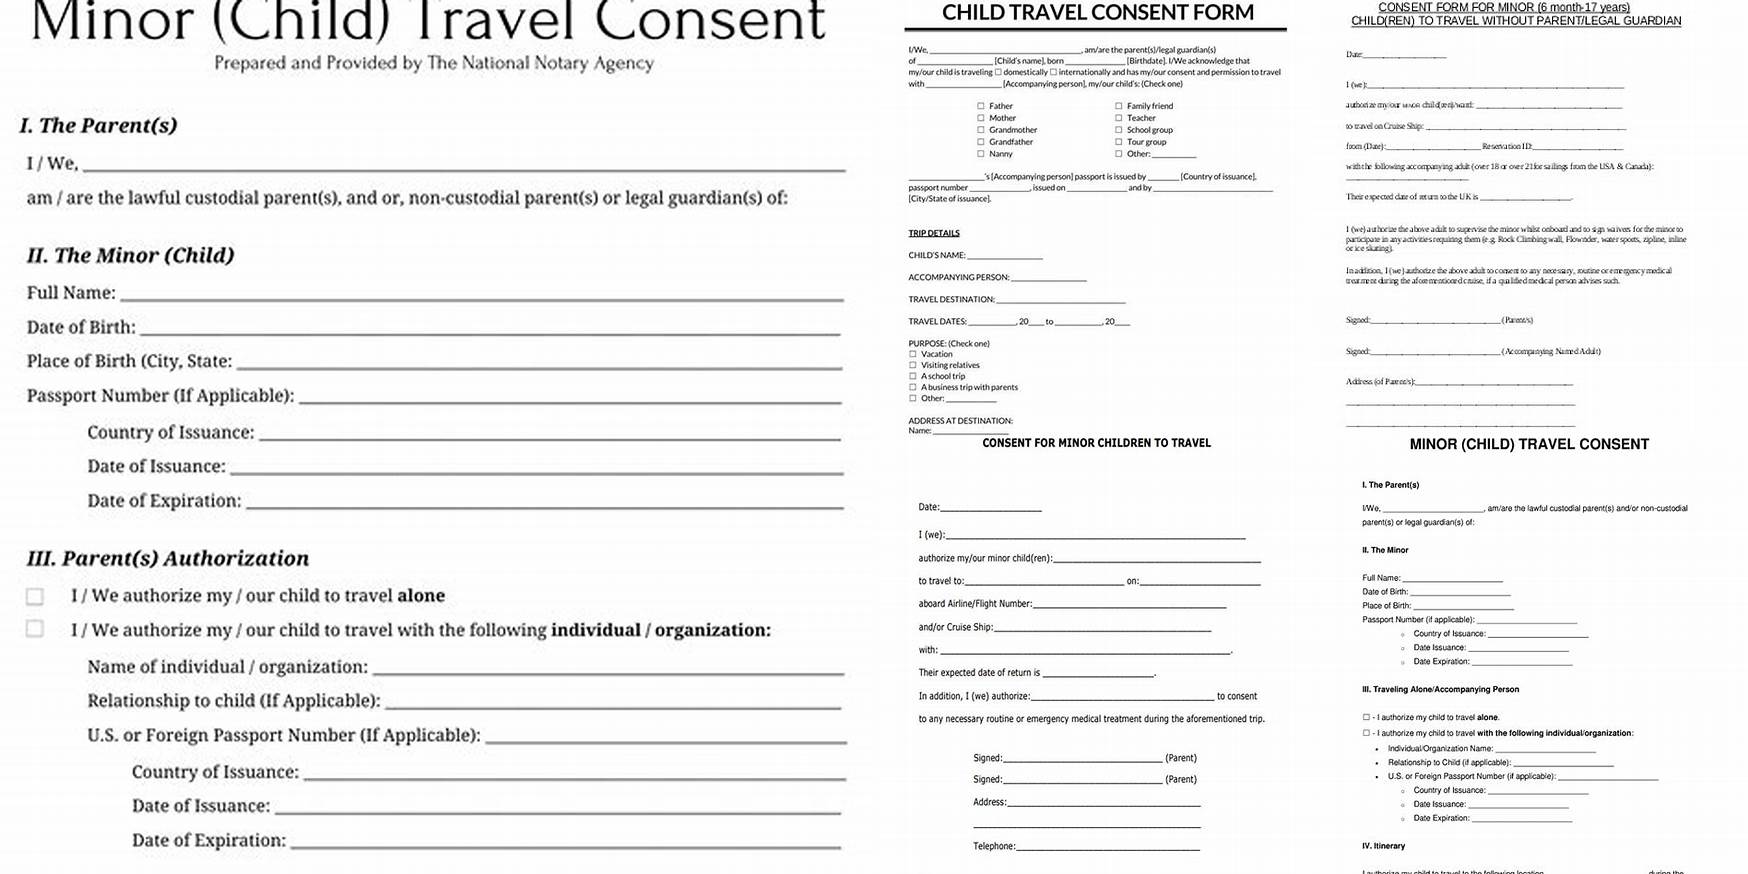 Does Minor Travel Consent Form Need To Be Notarized